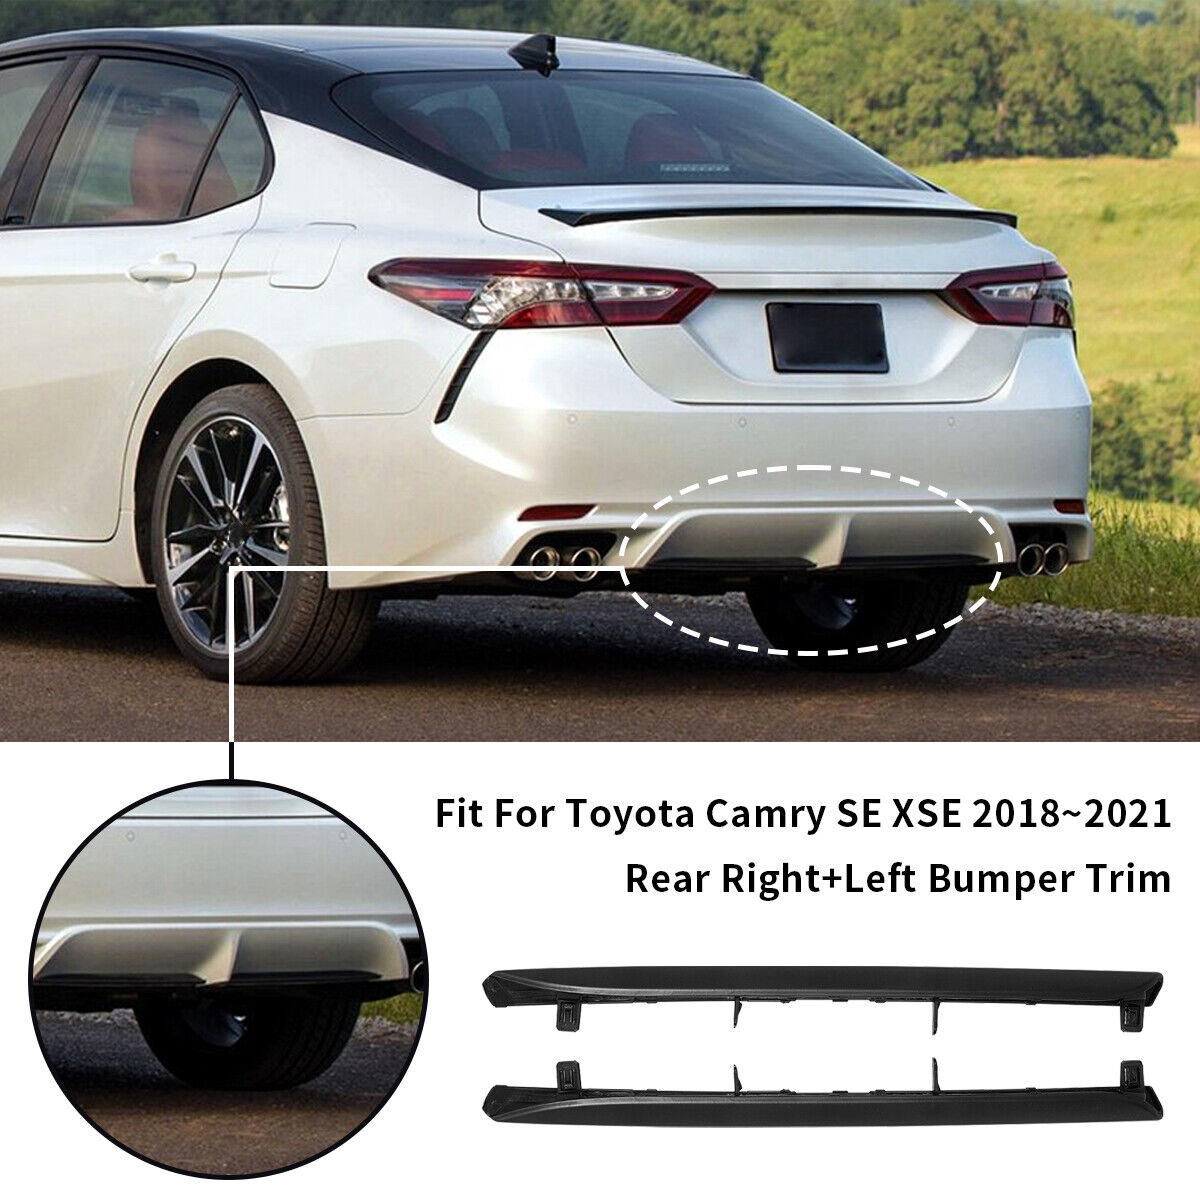 2x Rear Bumper Lower Plate Trim Molding Cover For 2018-2021 Toyota Camry SE XSE